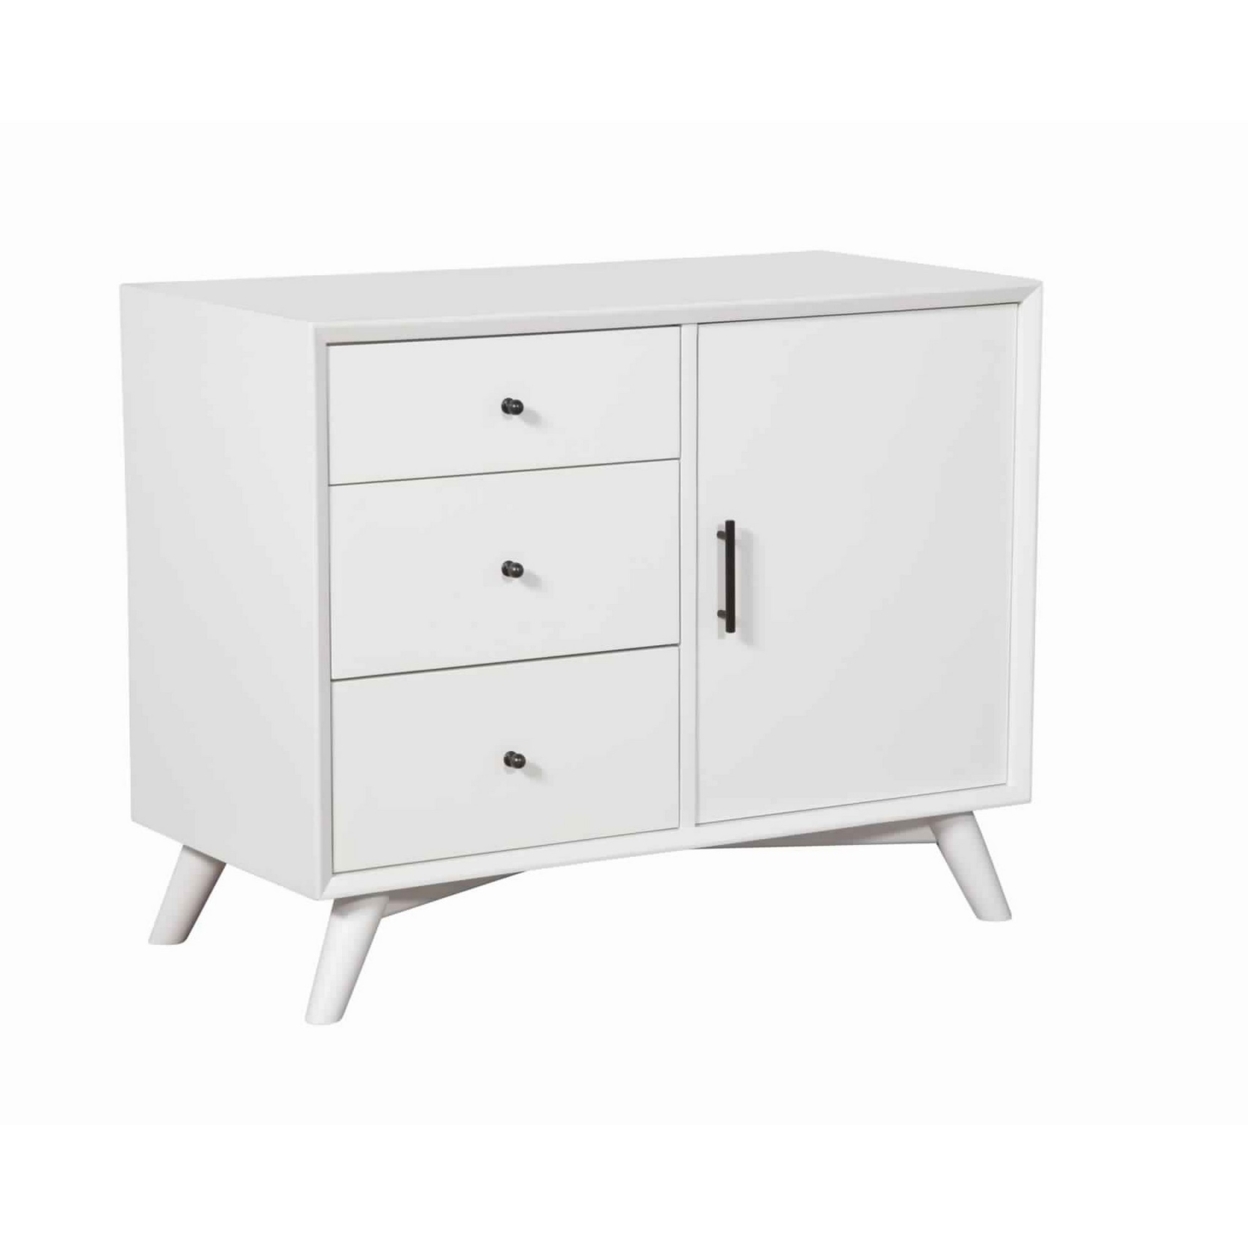 Wooden Accent Cabinet With 3 Drawers And 1 Door, White- Saltoro Sherpi